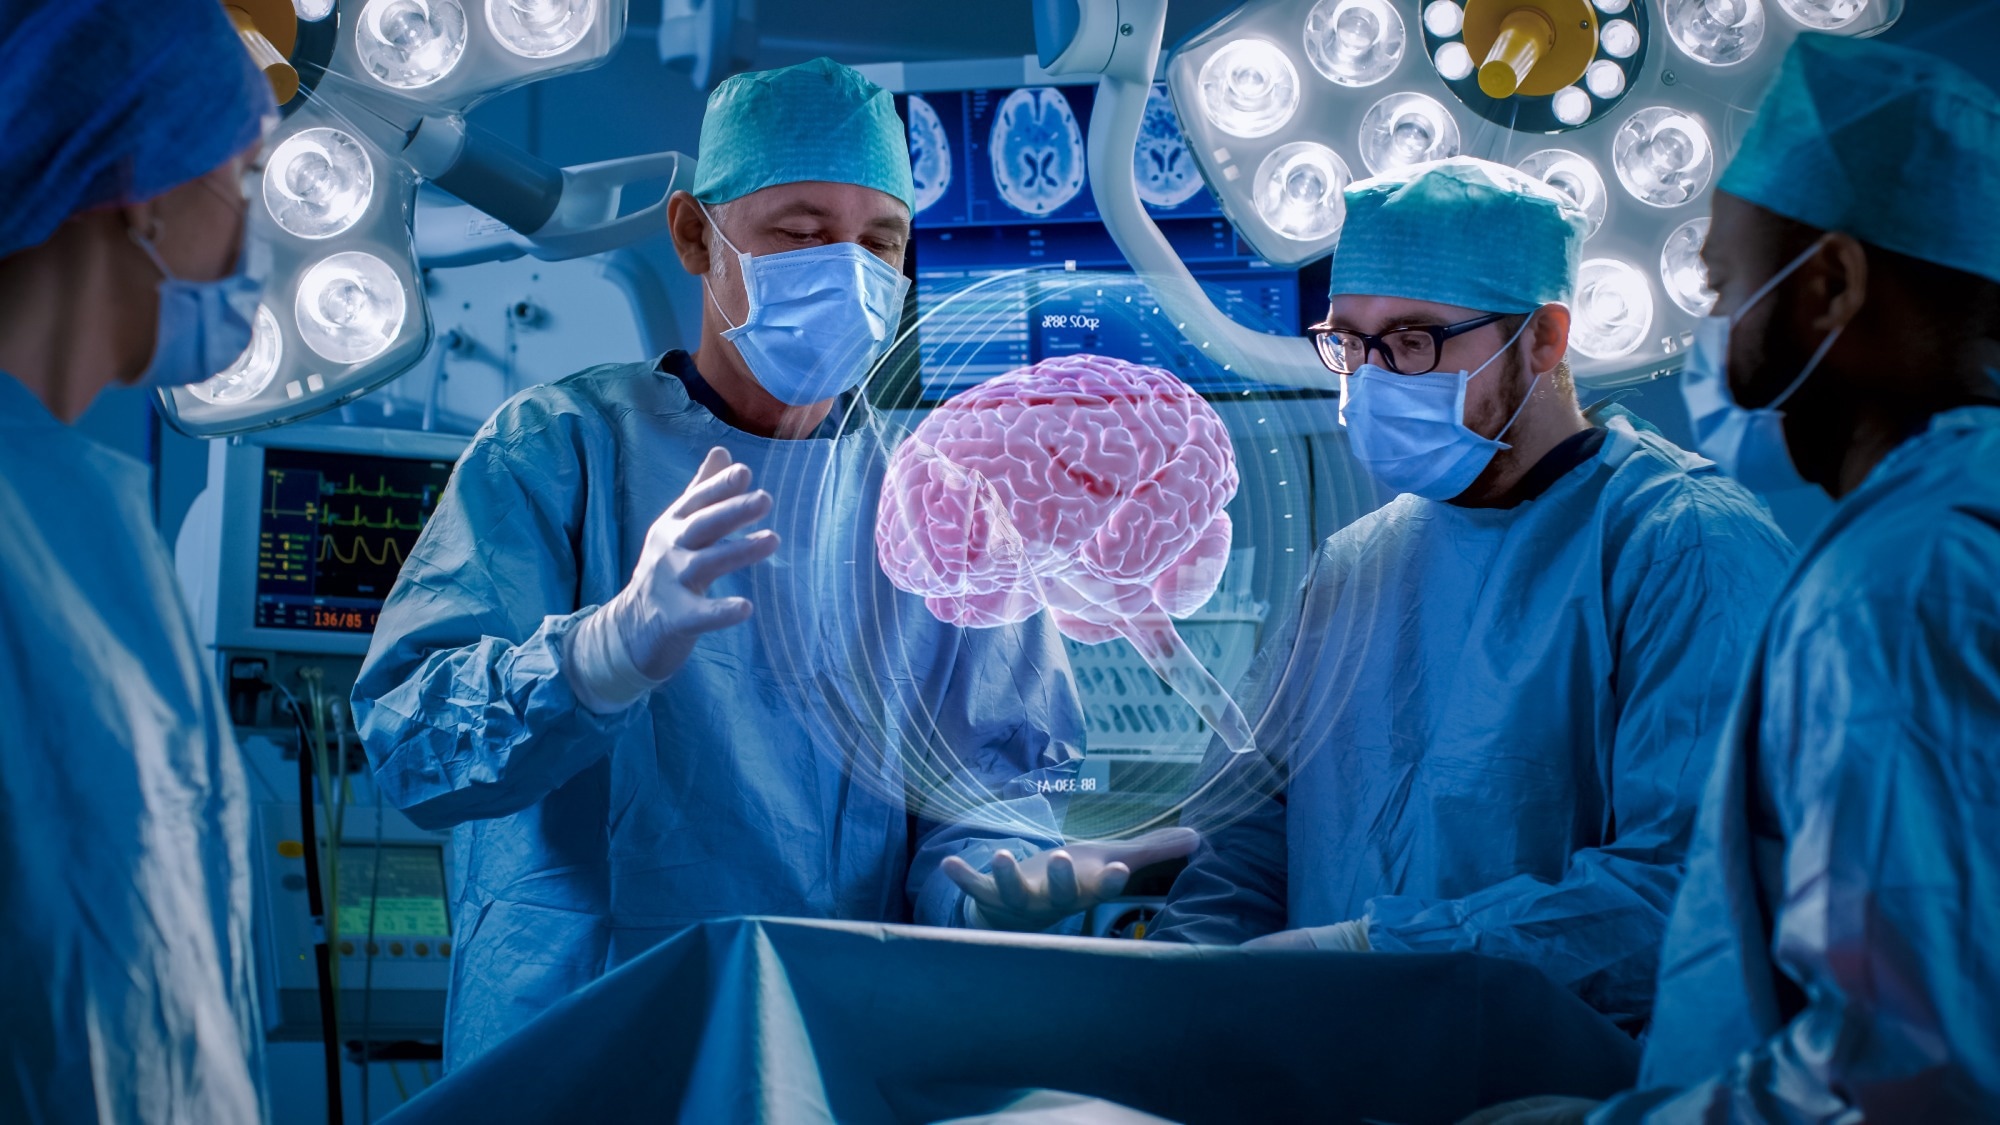 Study: Ultra-fast deep-learned CNS tumour classification during surgery. Image Credit: Gorodenkoff/Shutterstock.com